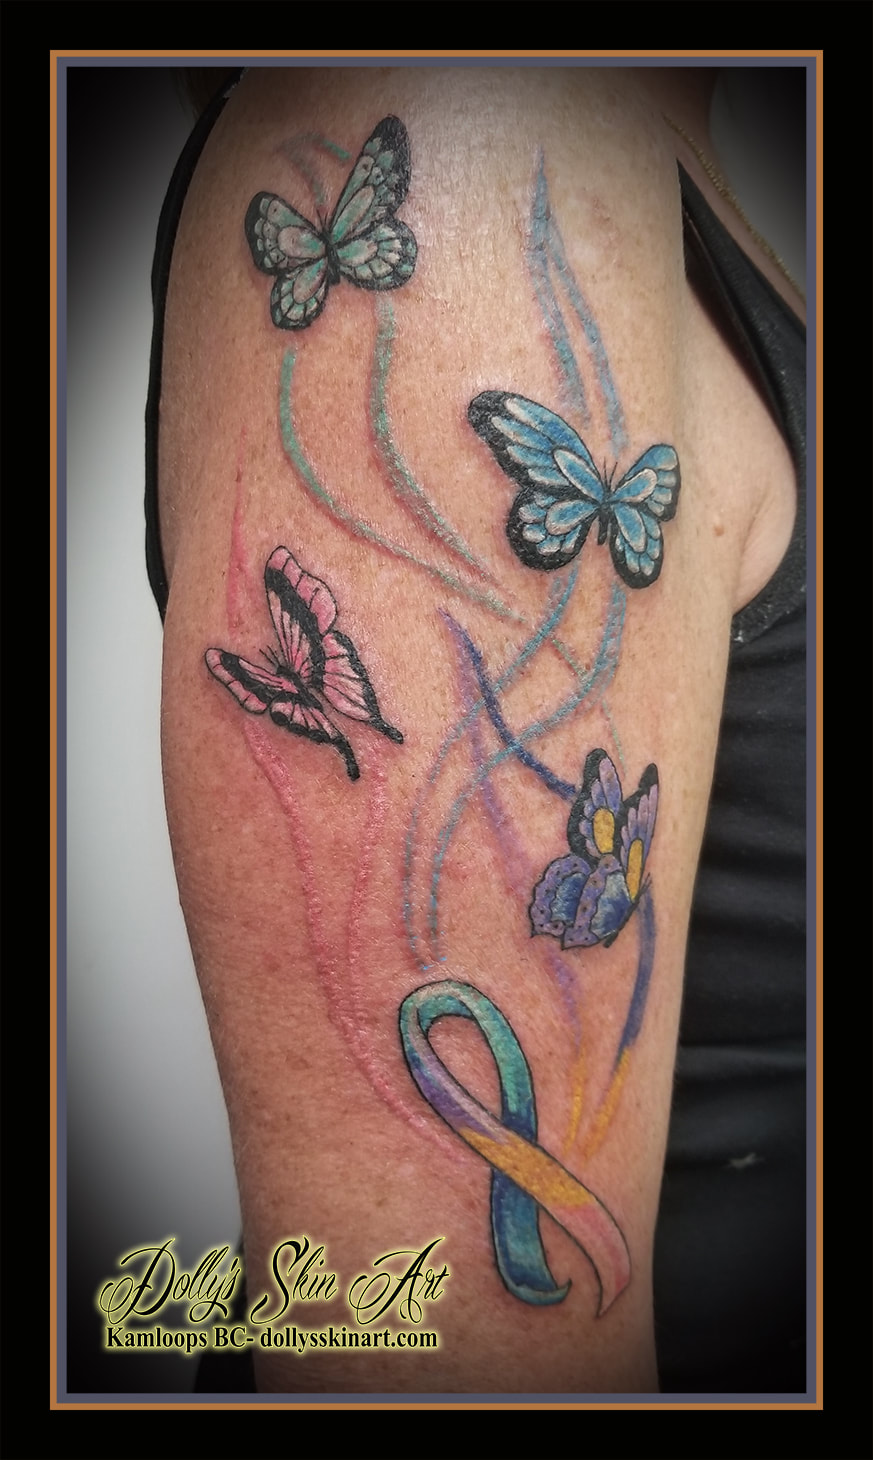 butterflies cancer ribbon tattoo colour arm blue purple yellow pink white teal black tattoo kamloops dolly's skin art